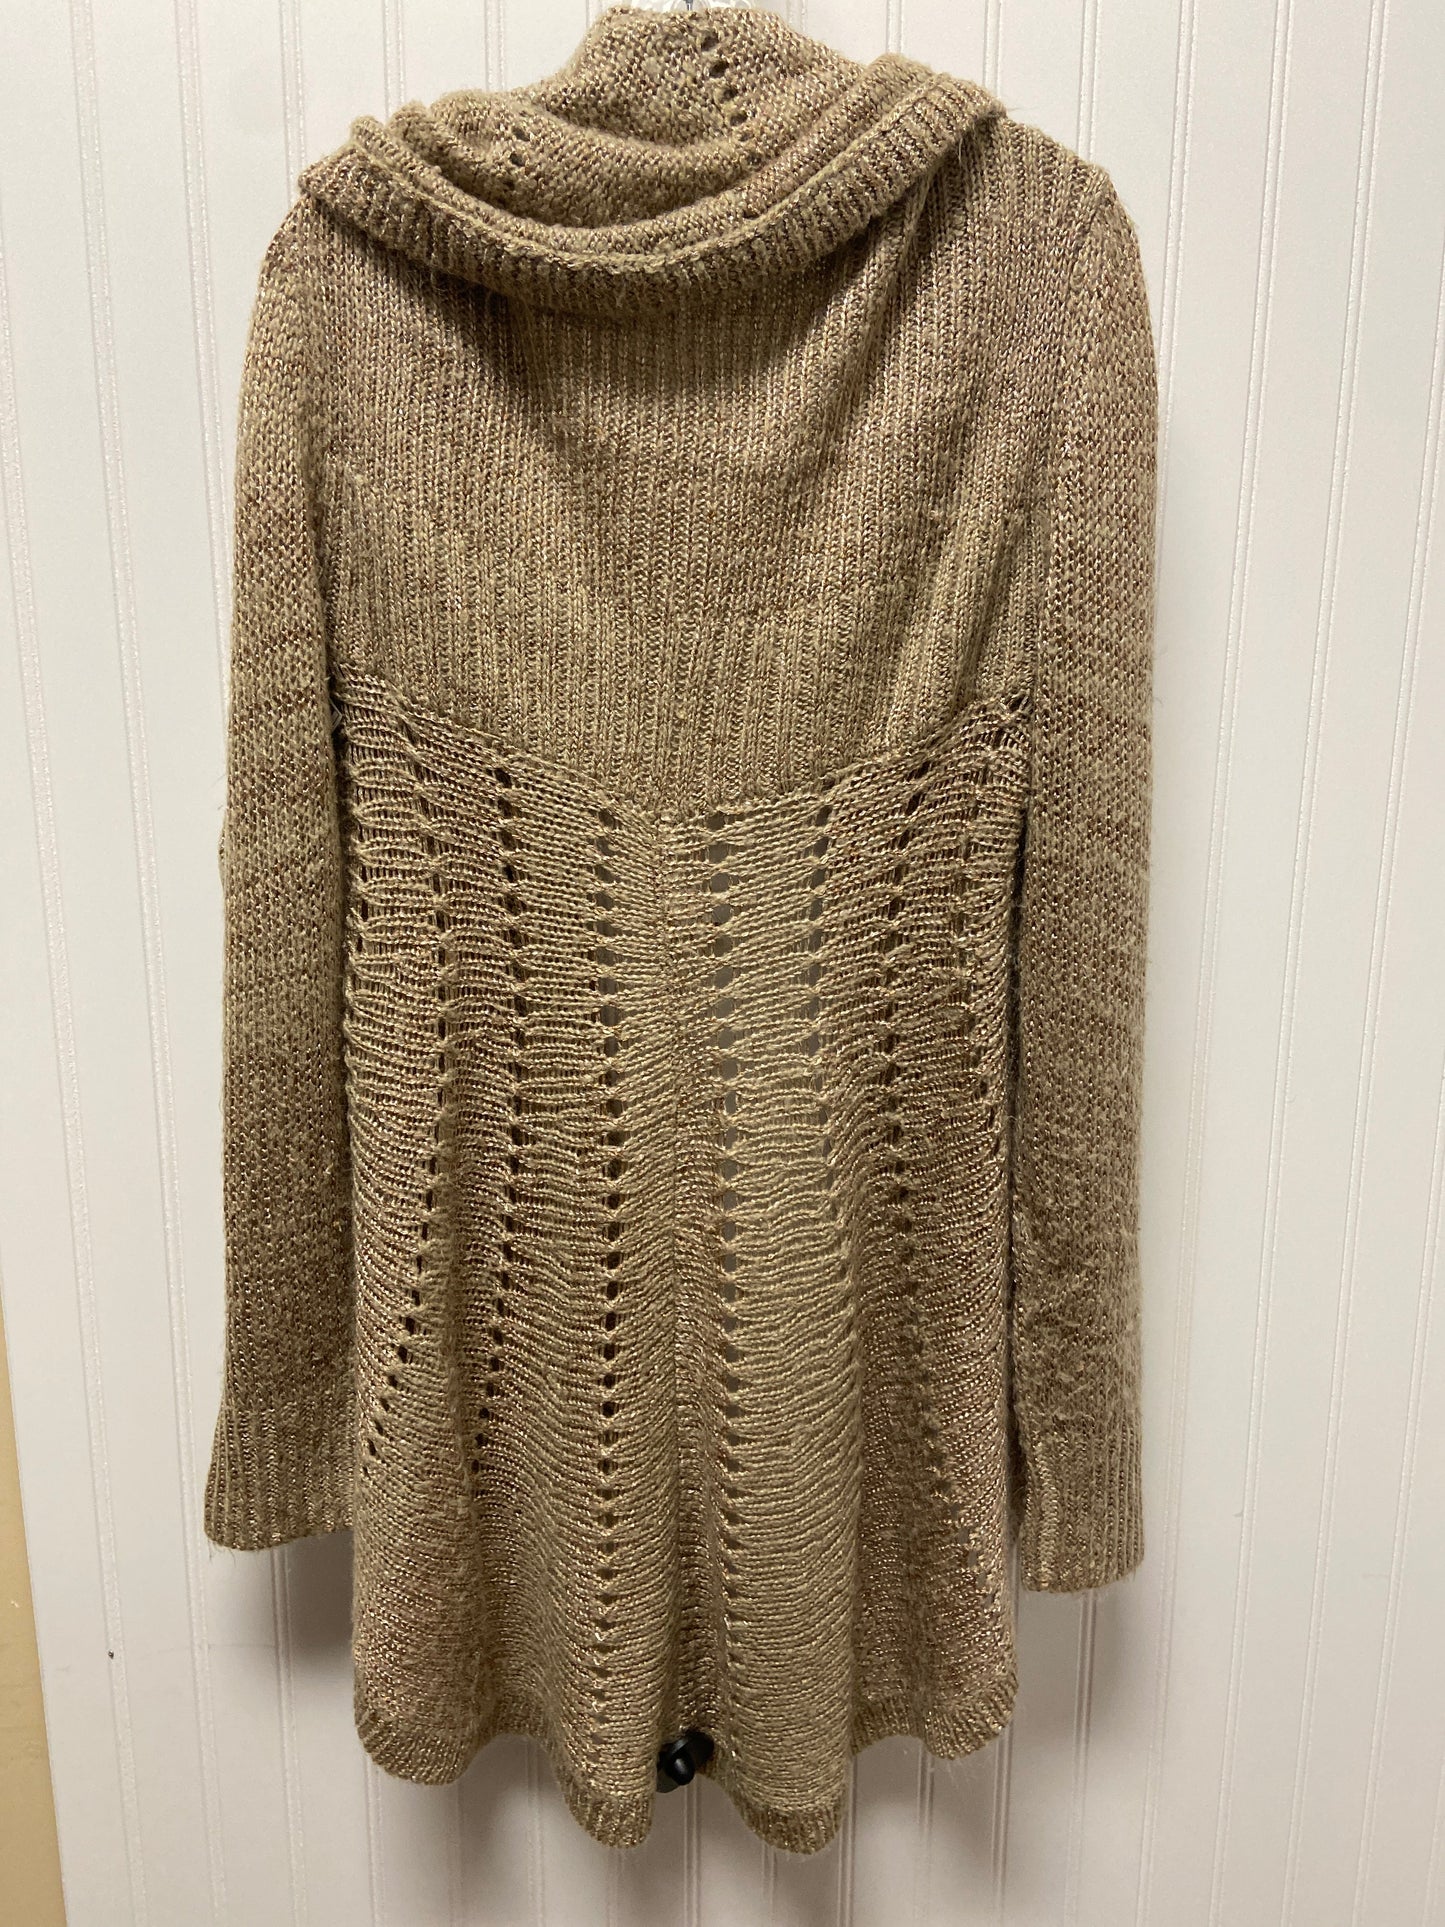 Sweater By Knox Rose  Size: 1x